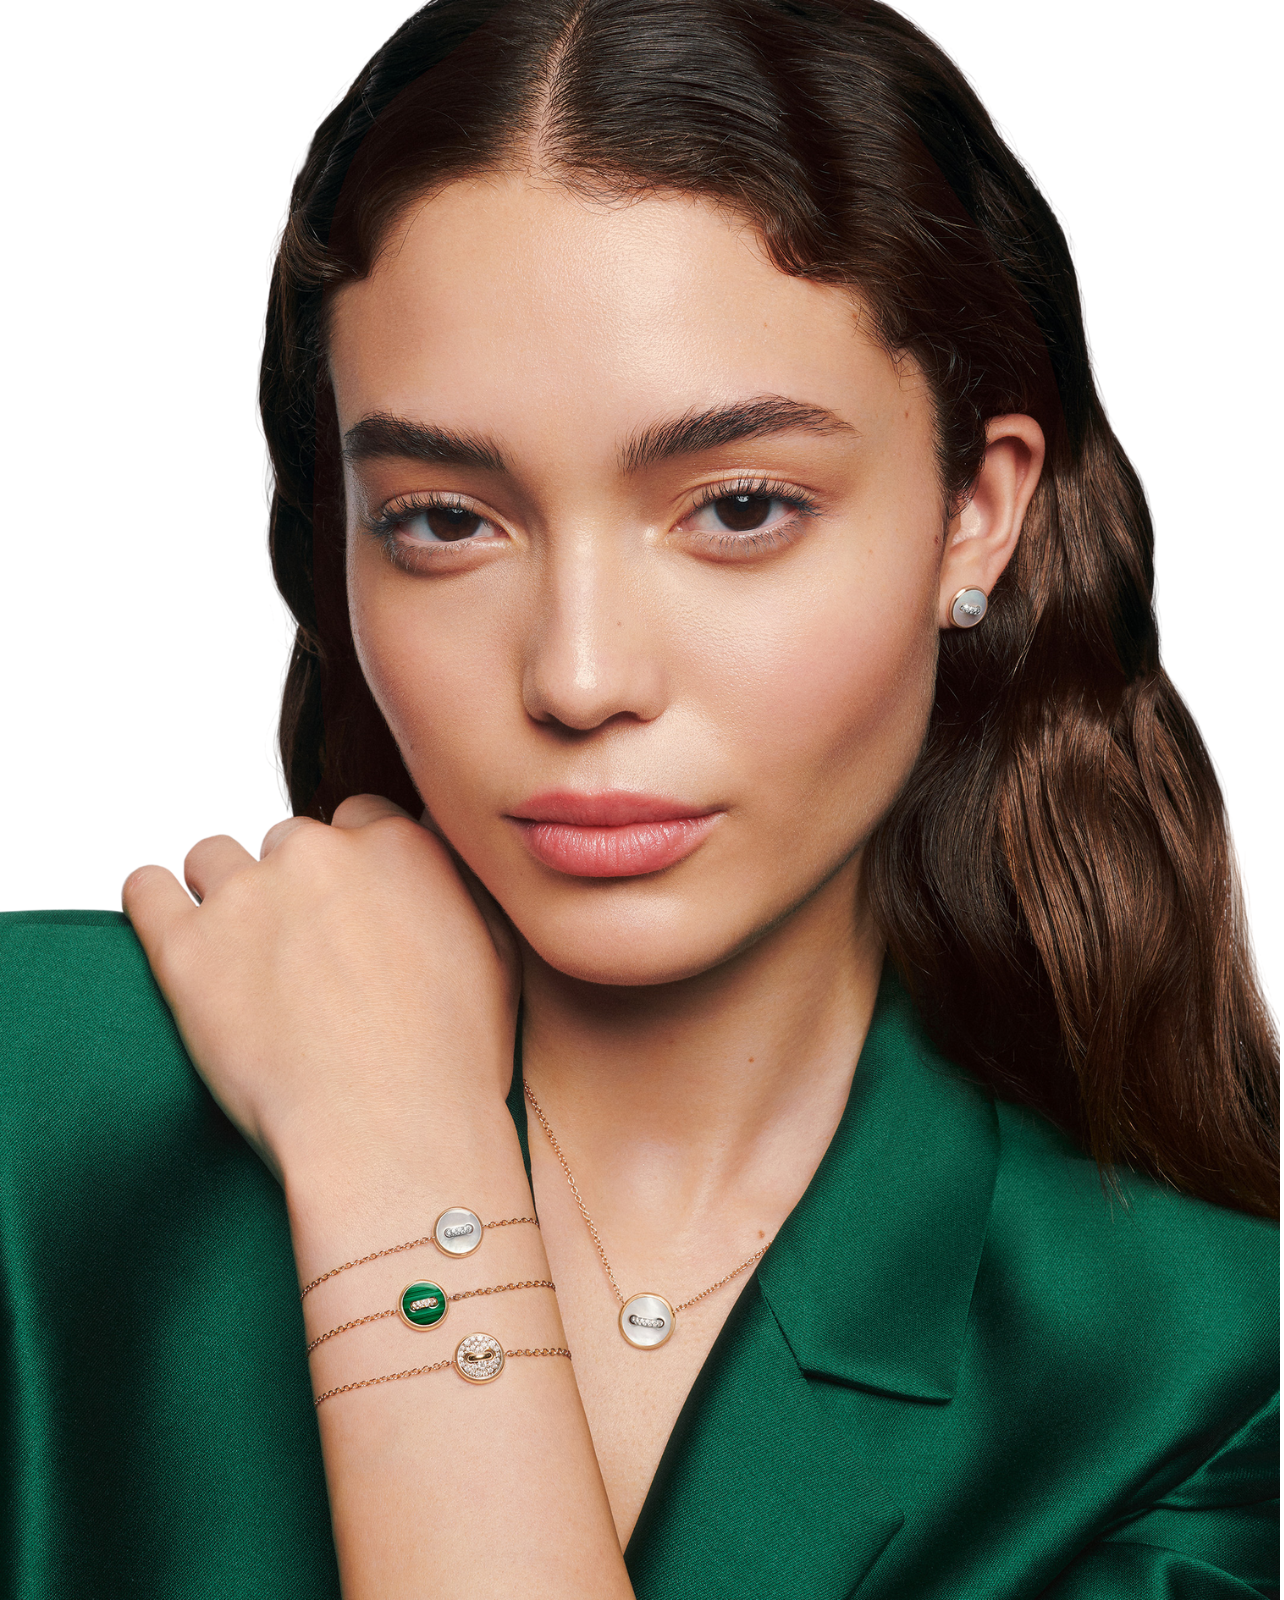 Pomellato campaign with model wearing green silk top with jewelry pieces